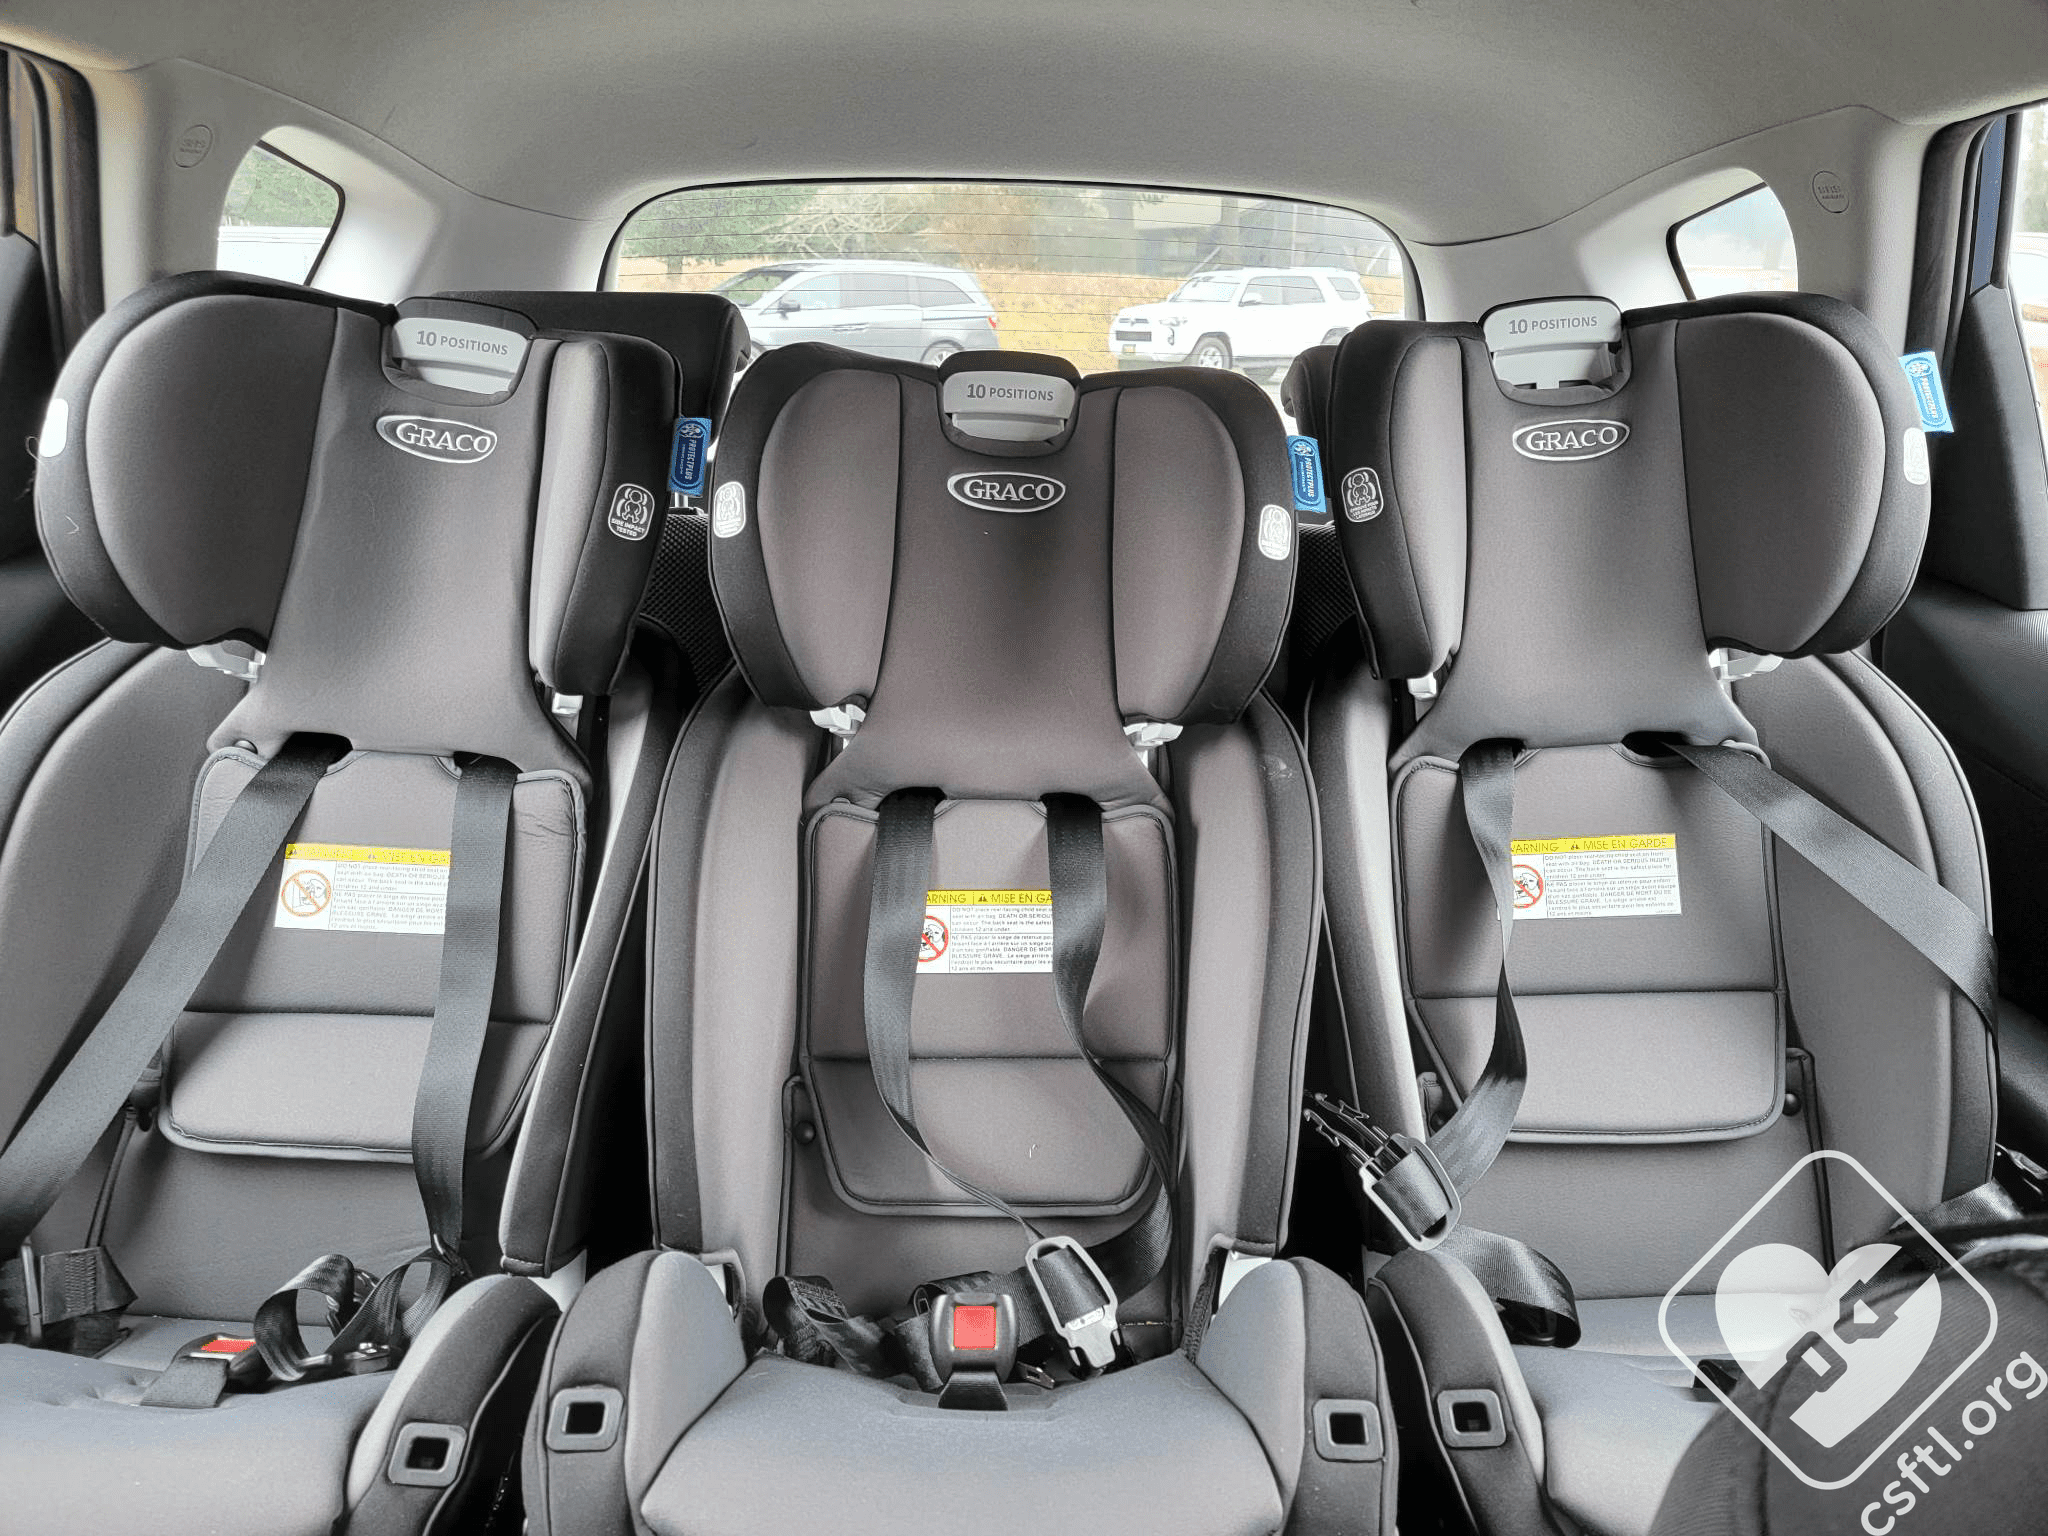 Graco SlimFit3 LX 3-in-1 All-in-One Car Seat with Space-Saving